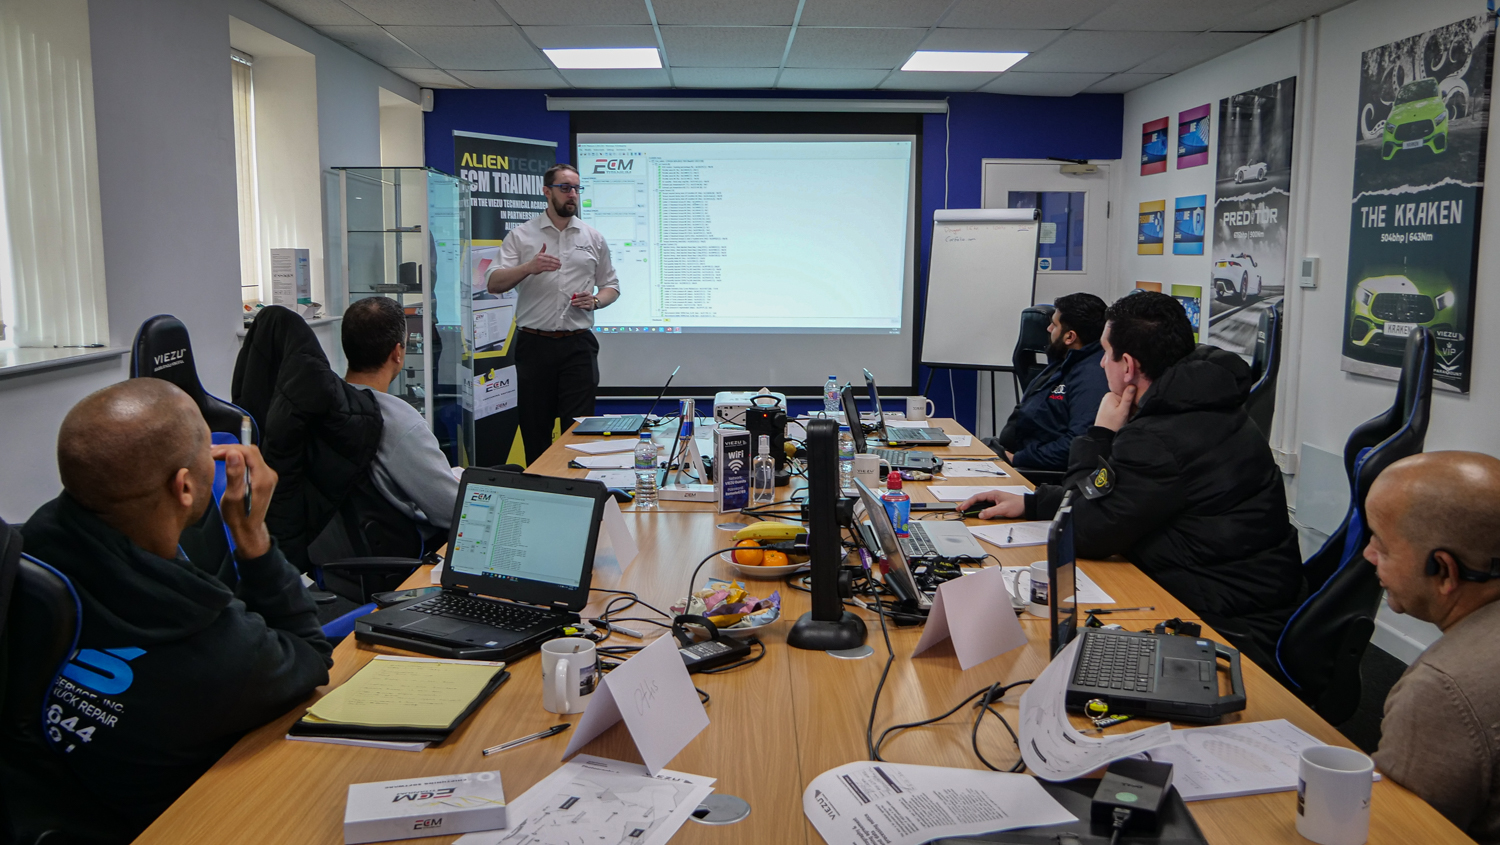 Learn to tune and Remap - Alientech ECM Training Course